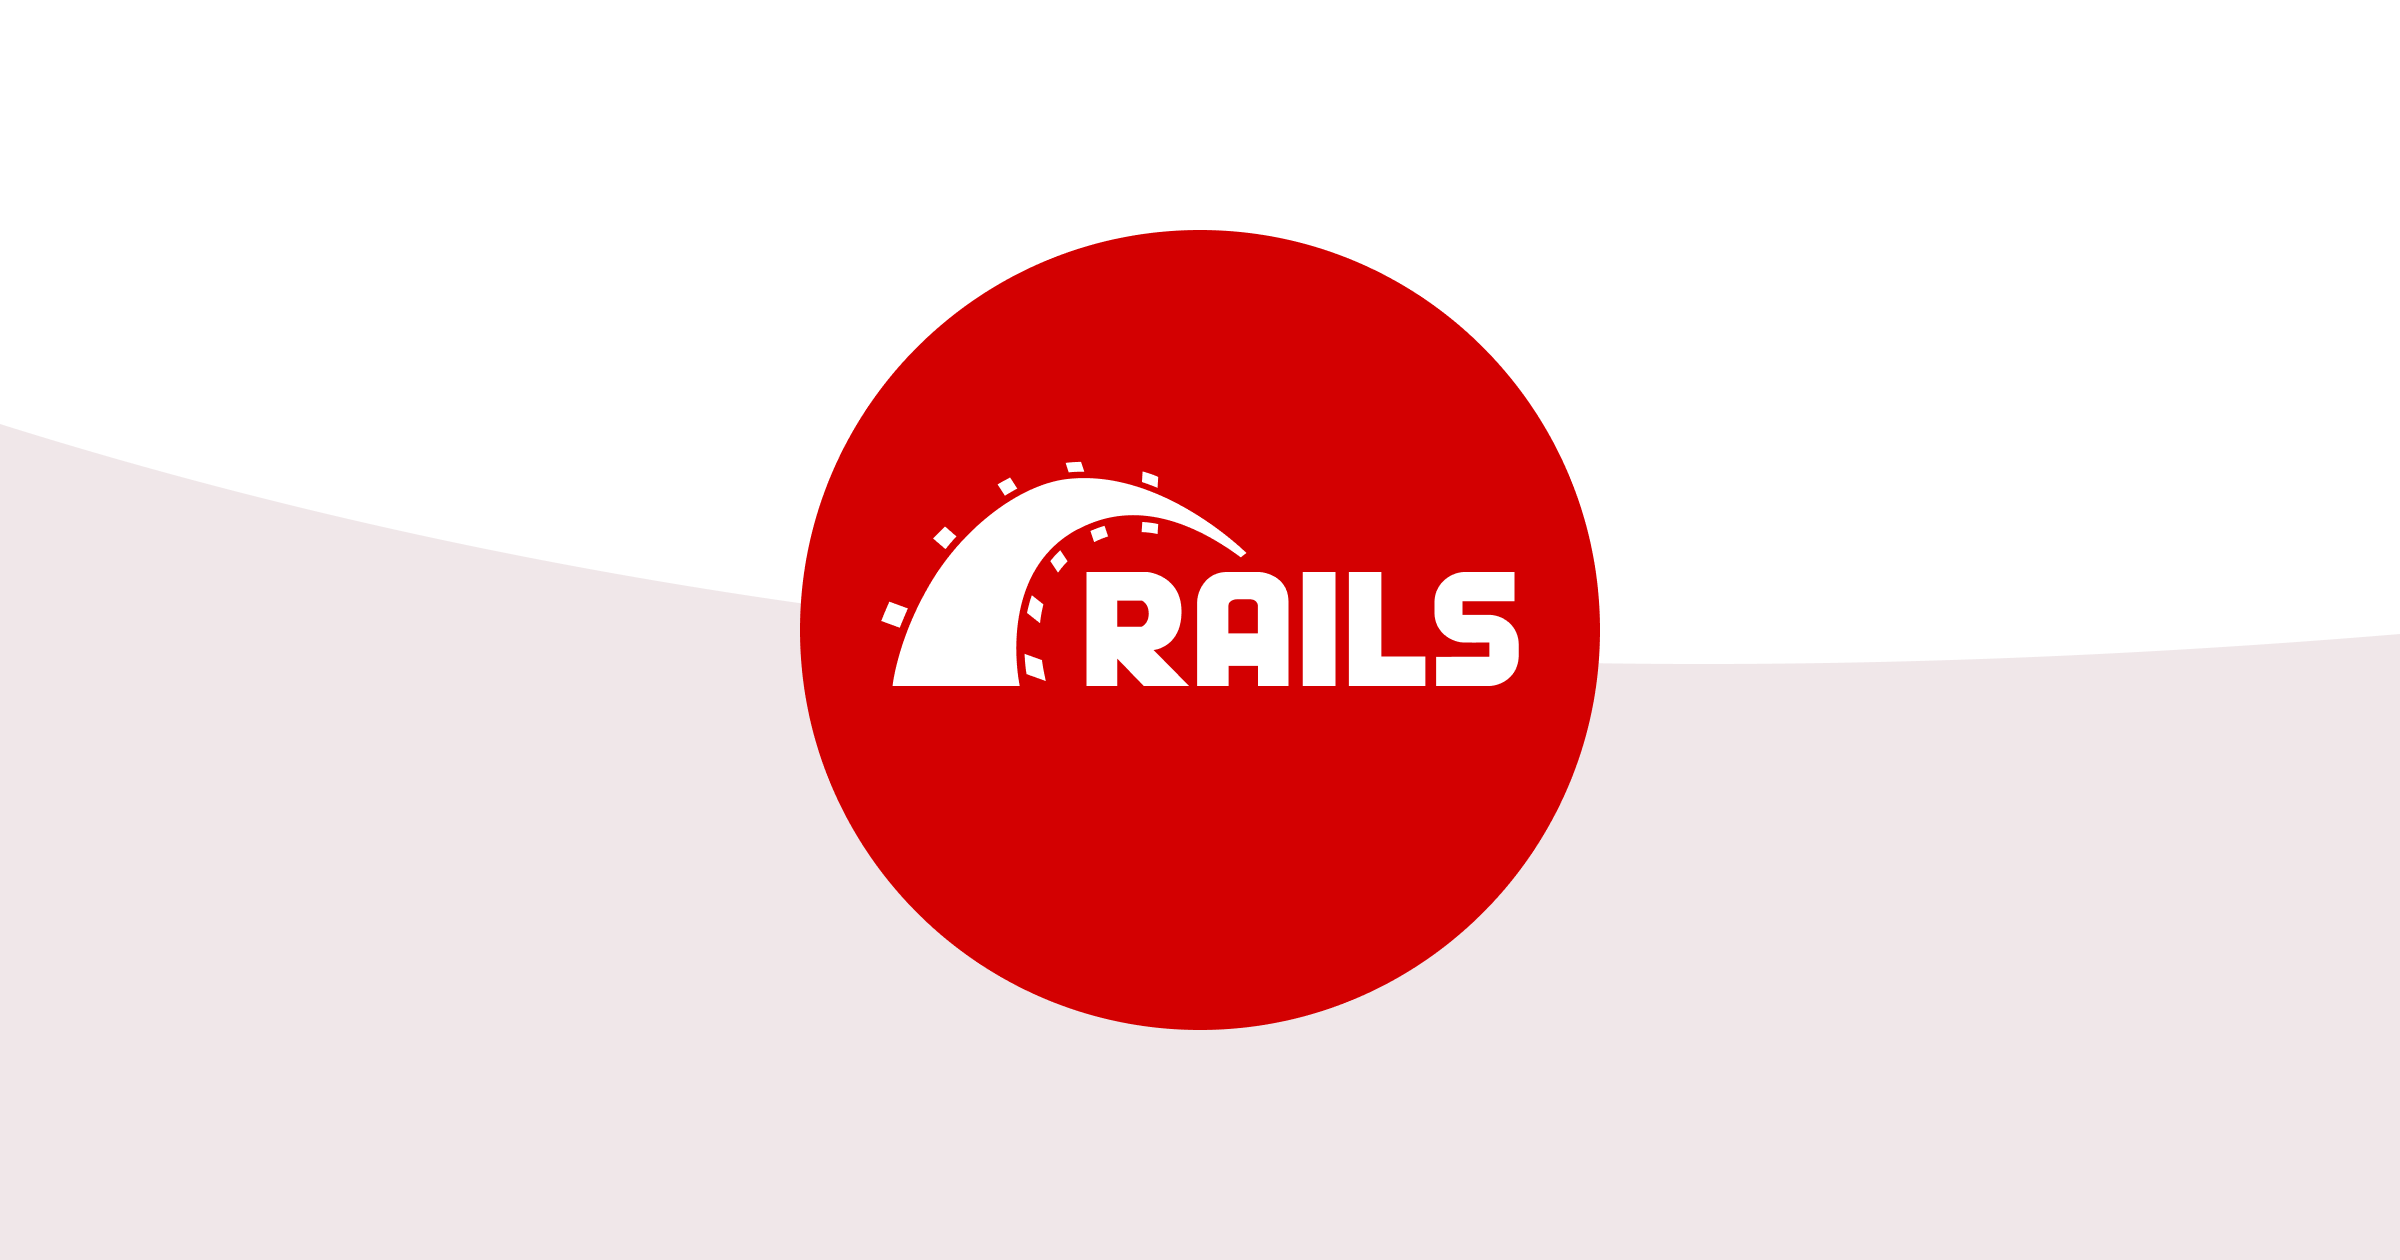 One of the primary goals of the Rails Foundation is to improve the Rails documentation for both new and existing users. We have a lot of ideas about h